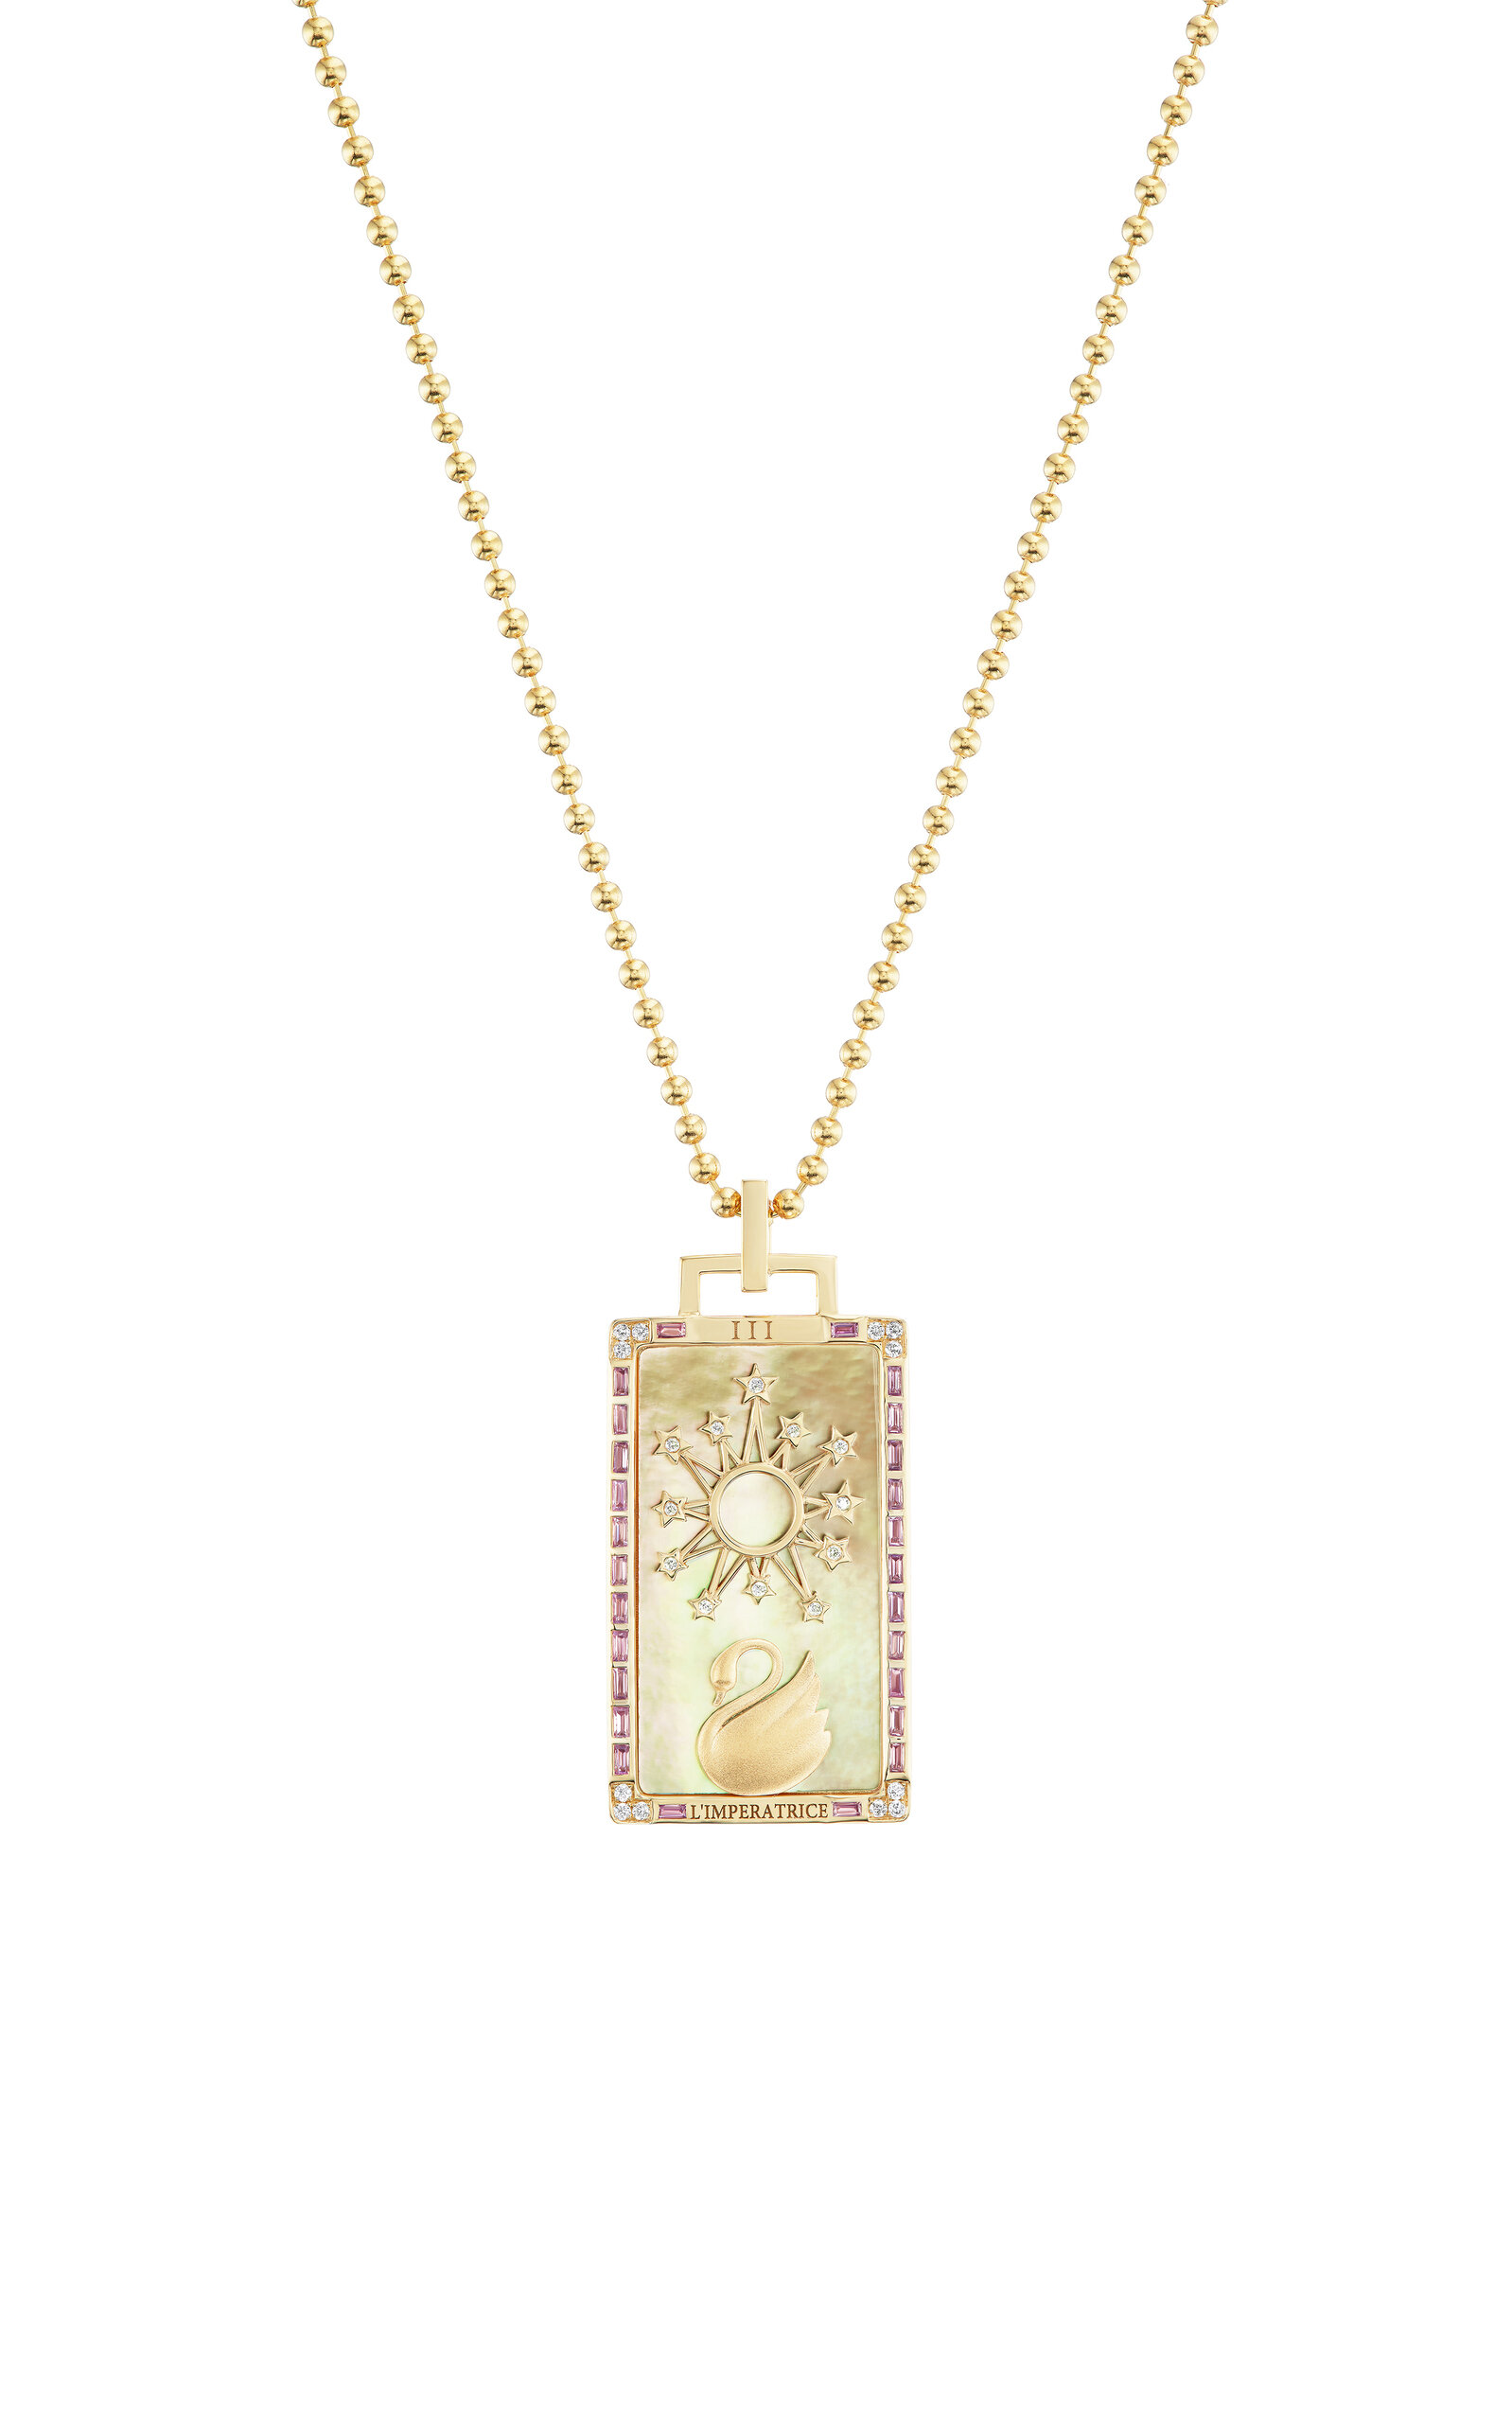 L'Imperatrice Piccola 18K Yellow Gold Mother-of-Pearl Tarot Card Necklace